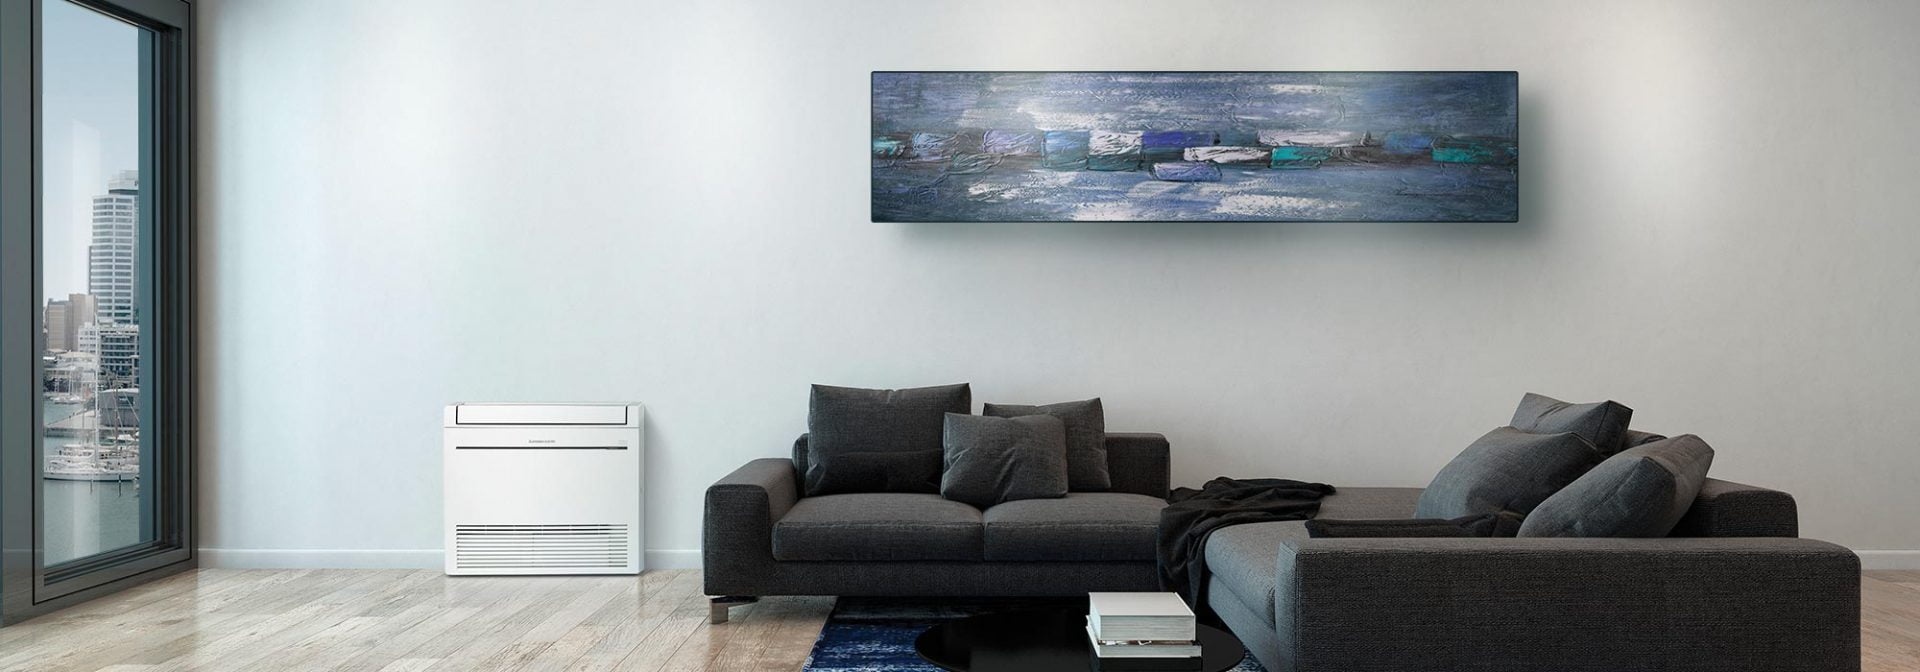 Modern living room with blue walls and grey couch. The room has a heat pump located on the floor